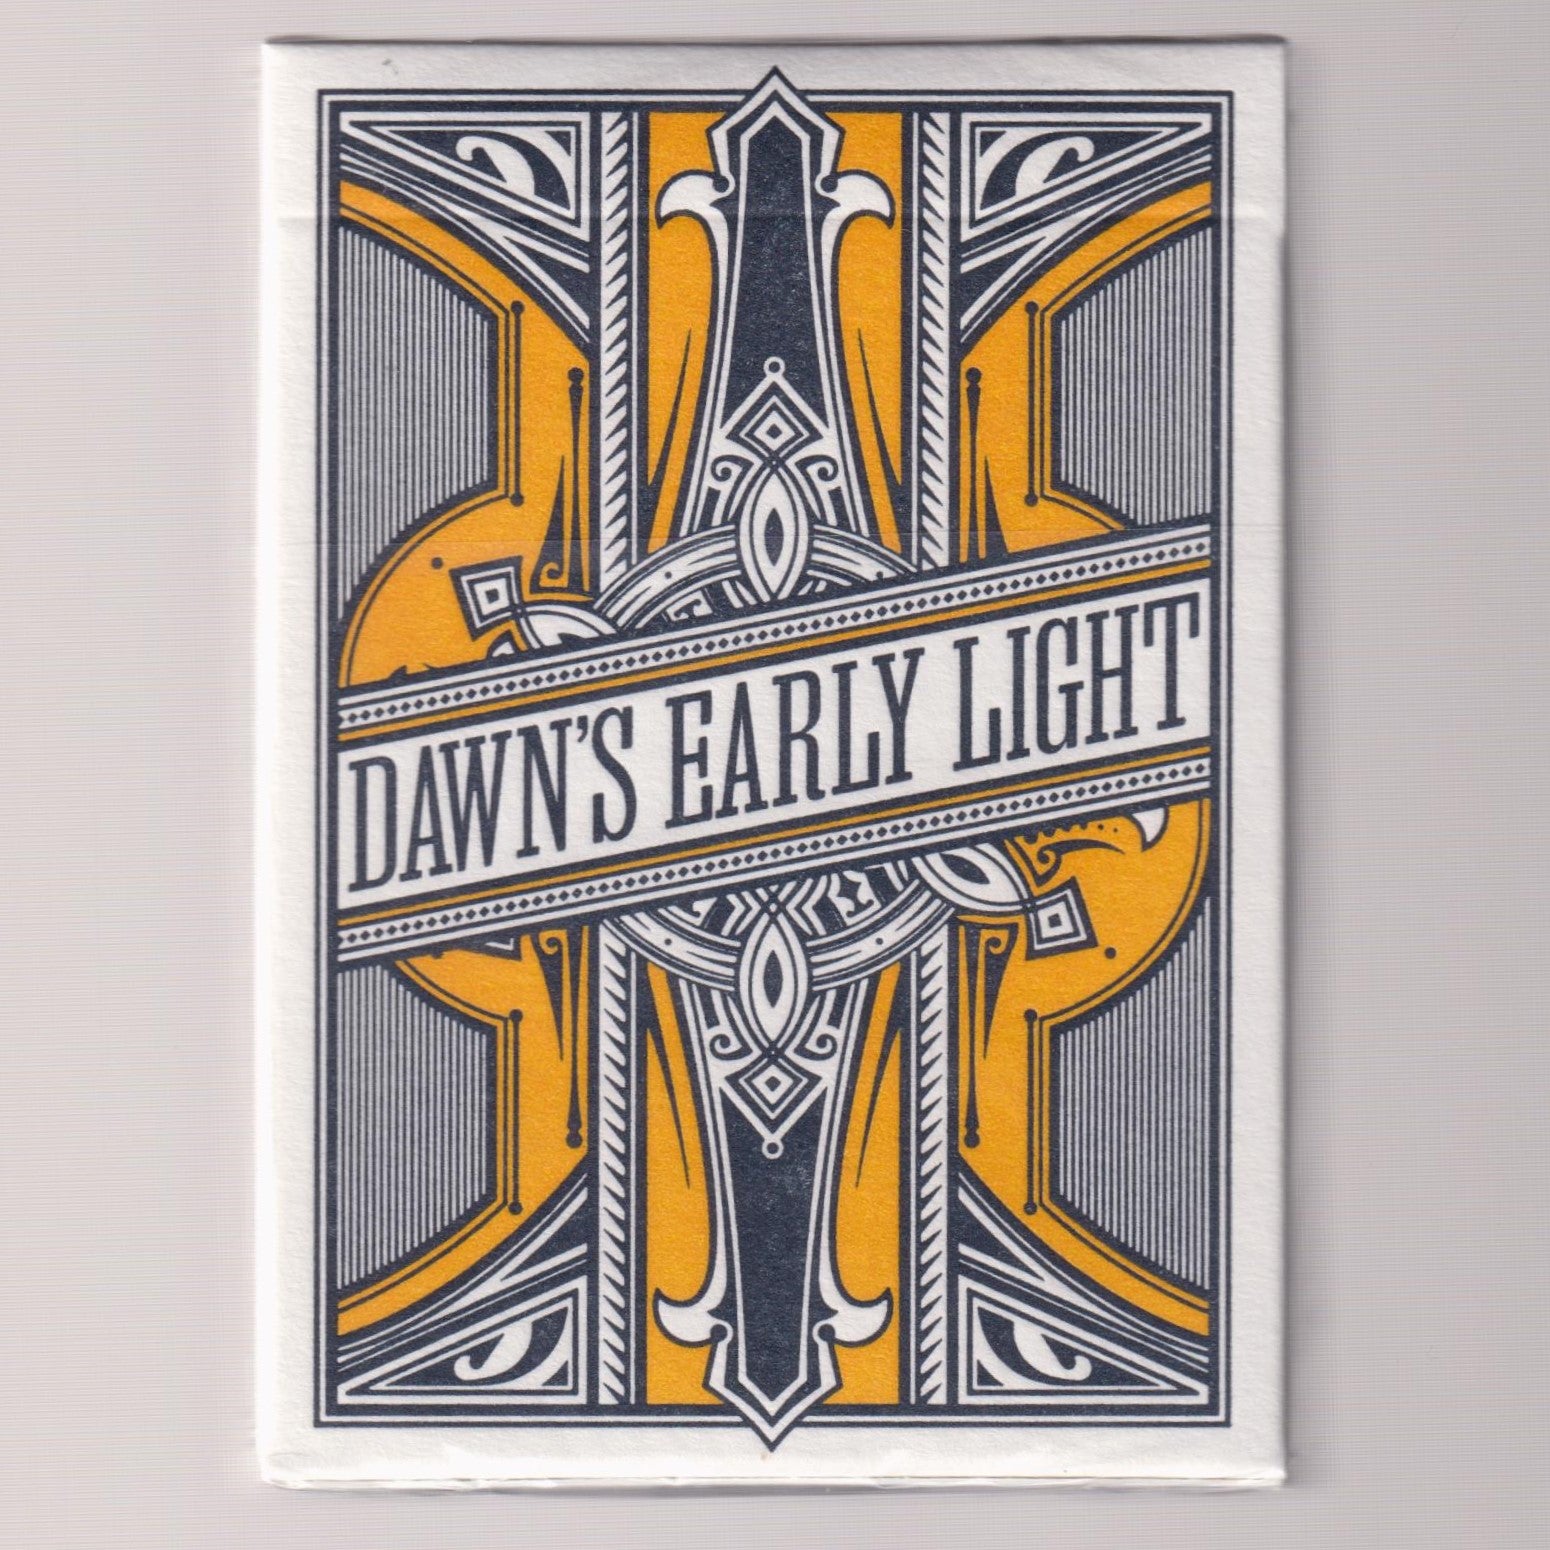 Dawn's Early Light Playing Cards